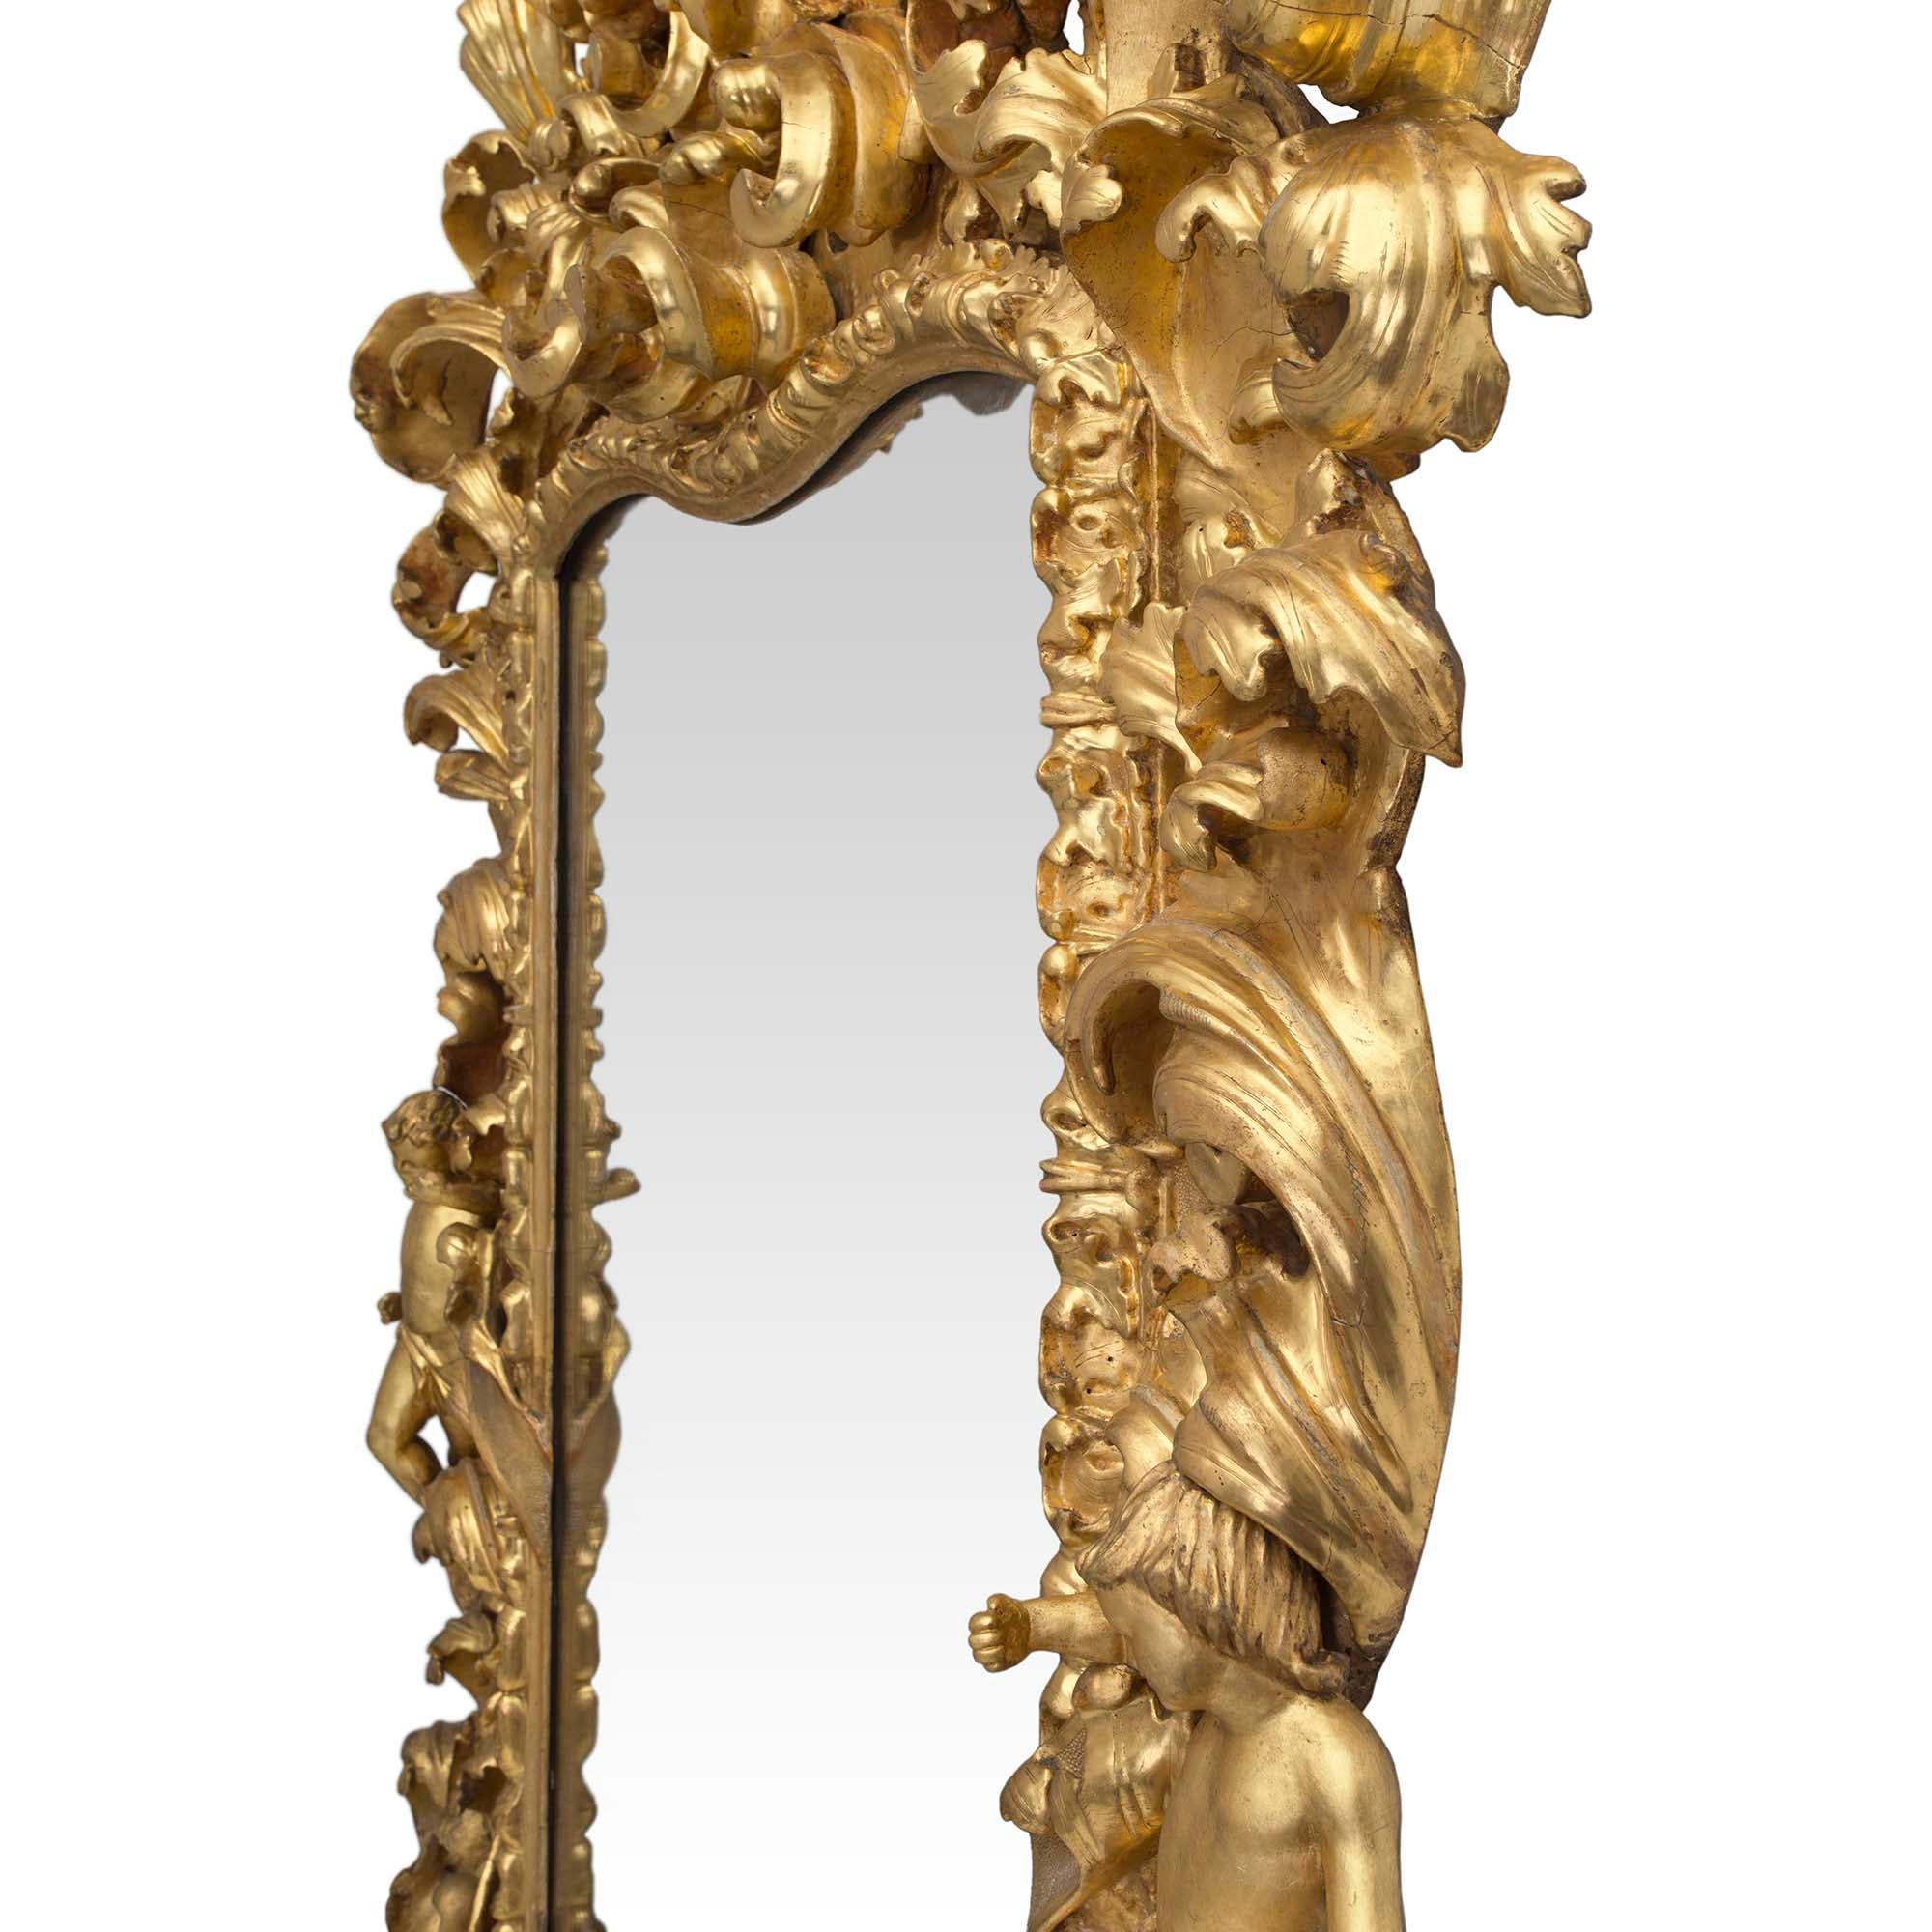 A spectacular and most impressive large scale Italian 17th century Louis XIV period Baroque giltwood mirror. The mirror is raised by two fanciful 'C' scrolled supports with a central pierced acanthus leaf design. Each side is adorned with exuberant